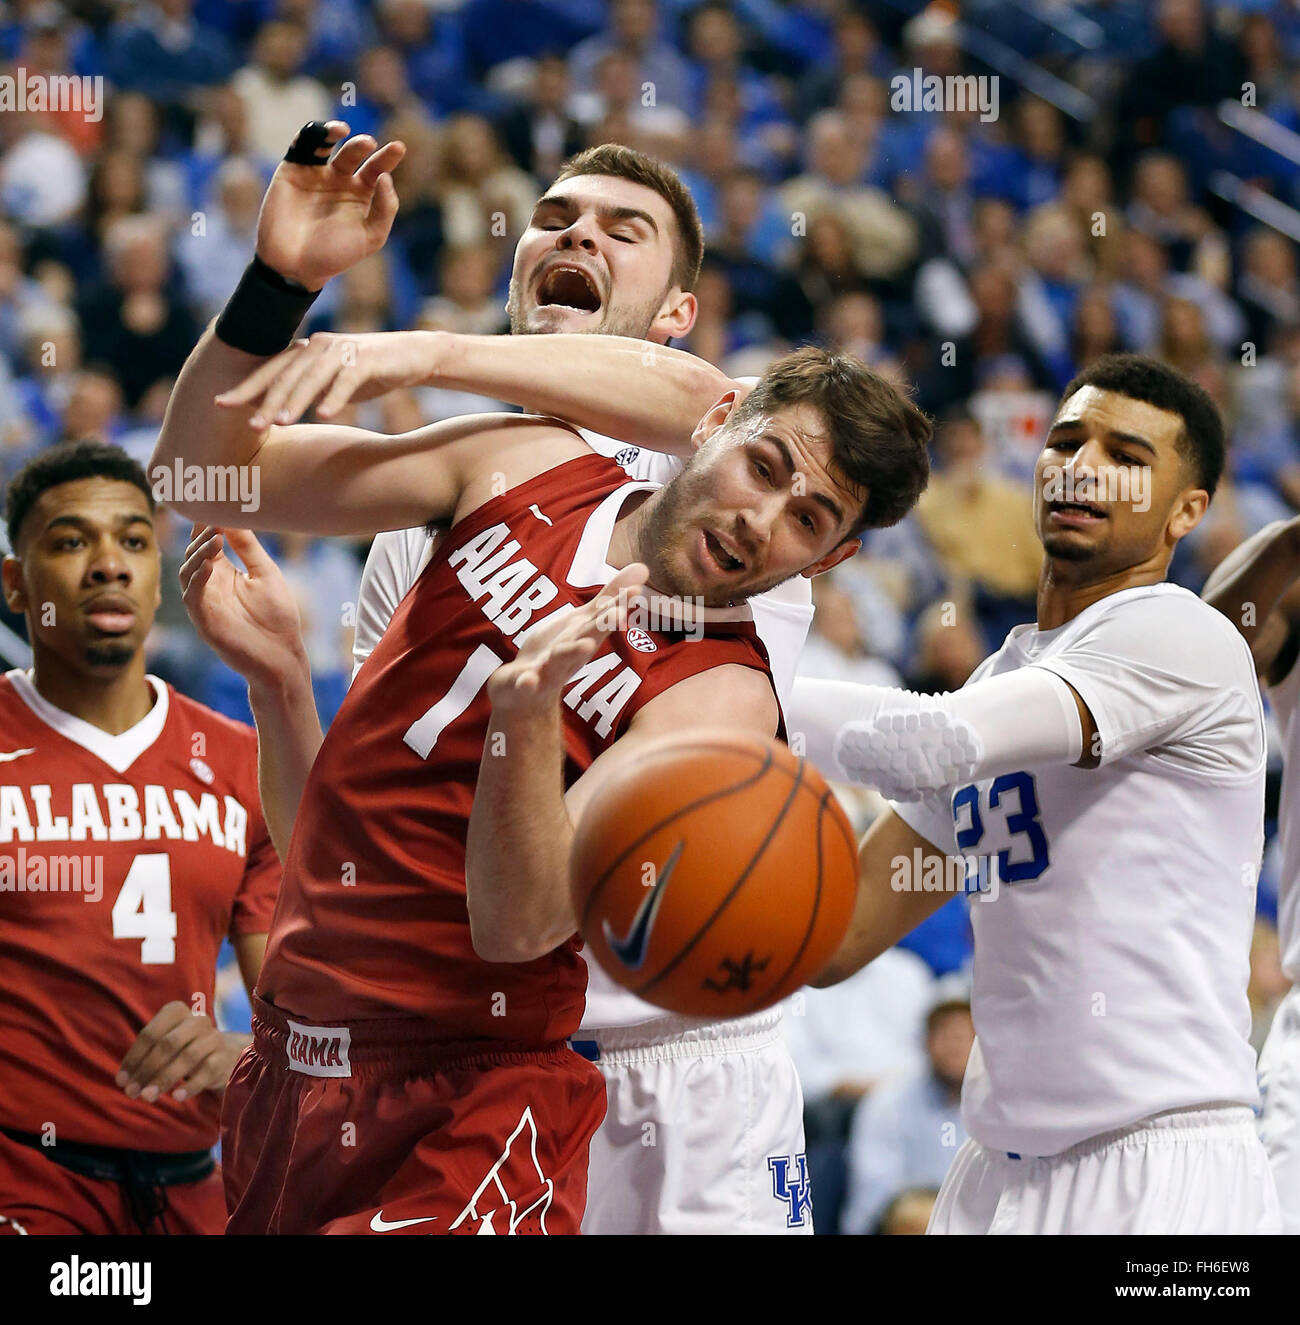 Lexington, KY, USA. 23rd Feb, 2016. Kentucky Wildcats forward Isaac Humphries (15) battled Alabama Crimson Tide forward Riley Norris (1) for a rebound as the University of Kentucky played the University of Alabama in Rupp Arena in Lexington, Ky., Tuesday, February 23 2016. This is first half mens basketball action. © Lexington Herald-Leader/ZUMA Wire/Alamy Live News Stock Photo